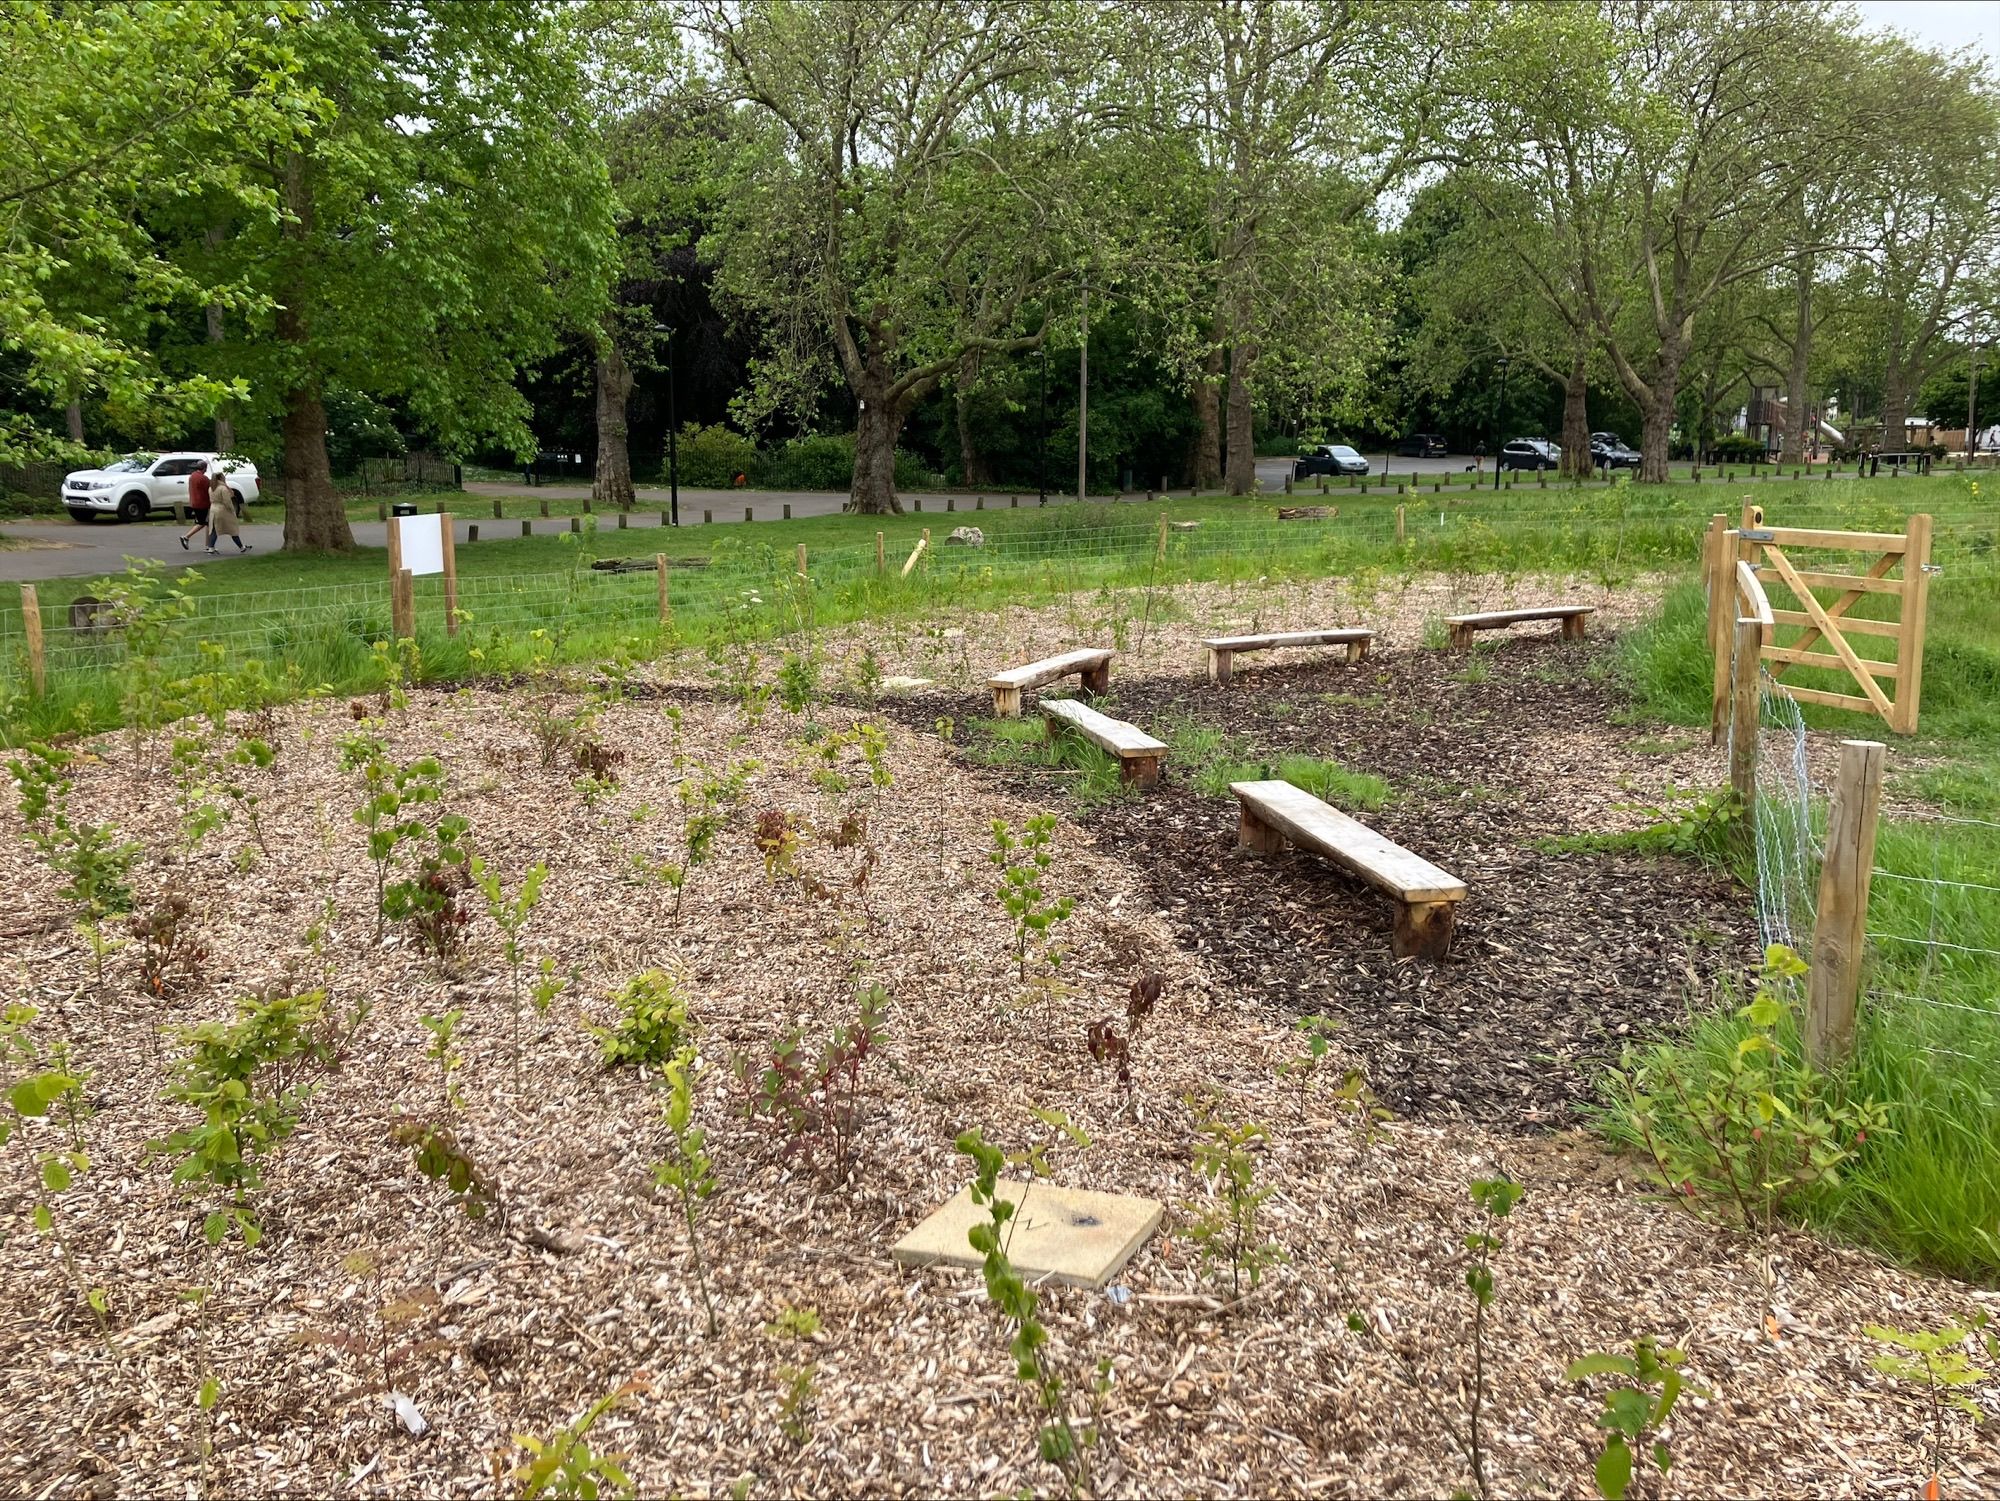 Peckham Rye Park and Common Tiny Forest. June 23 - Photo Credit Southwark Council